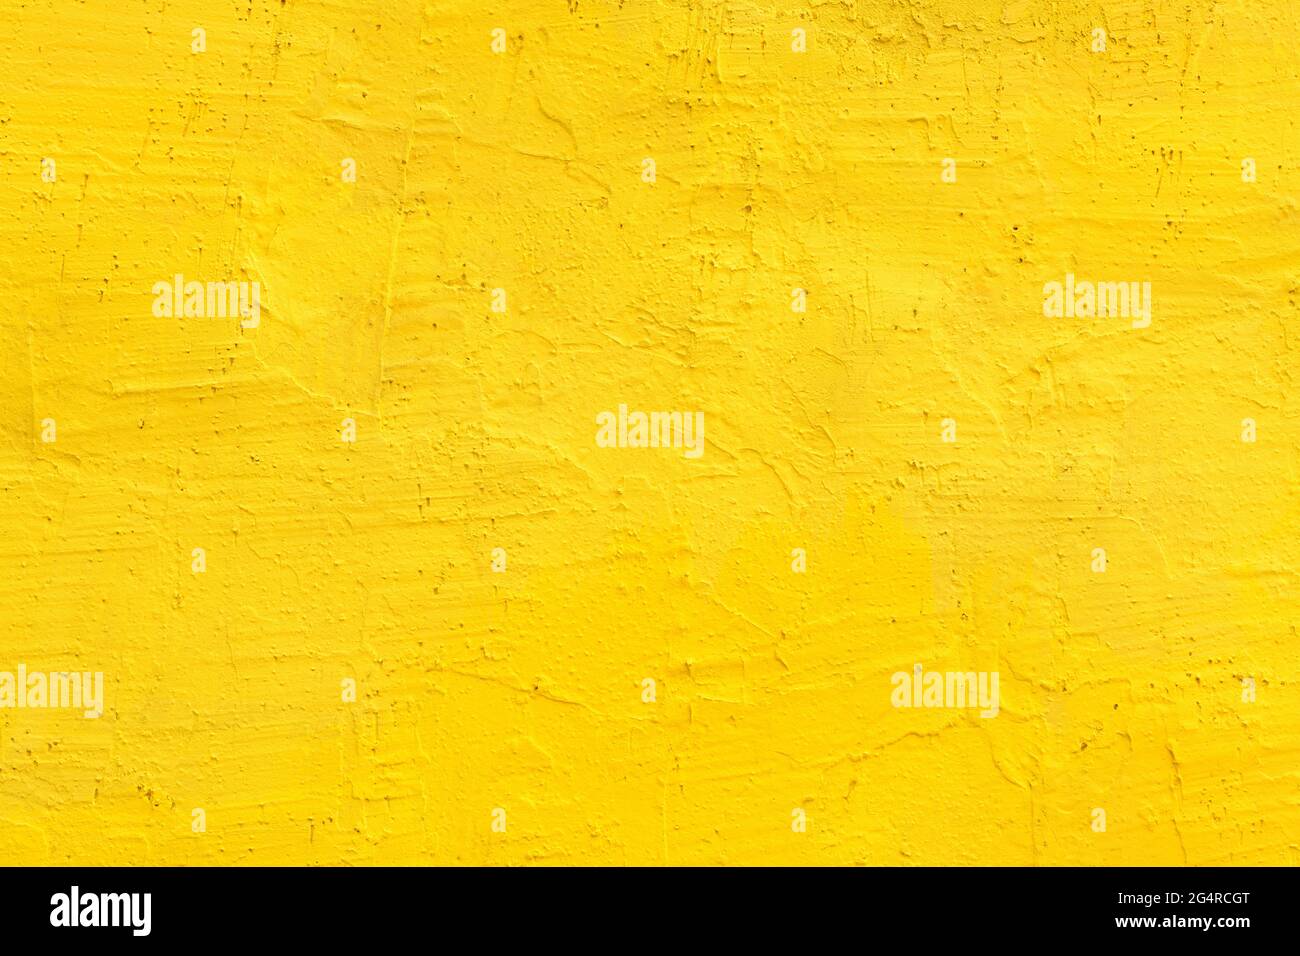 Yellow cement wall as background, unique urban surface texture with vibrant color Stock Photo